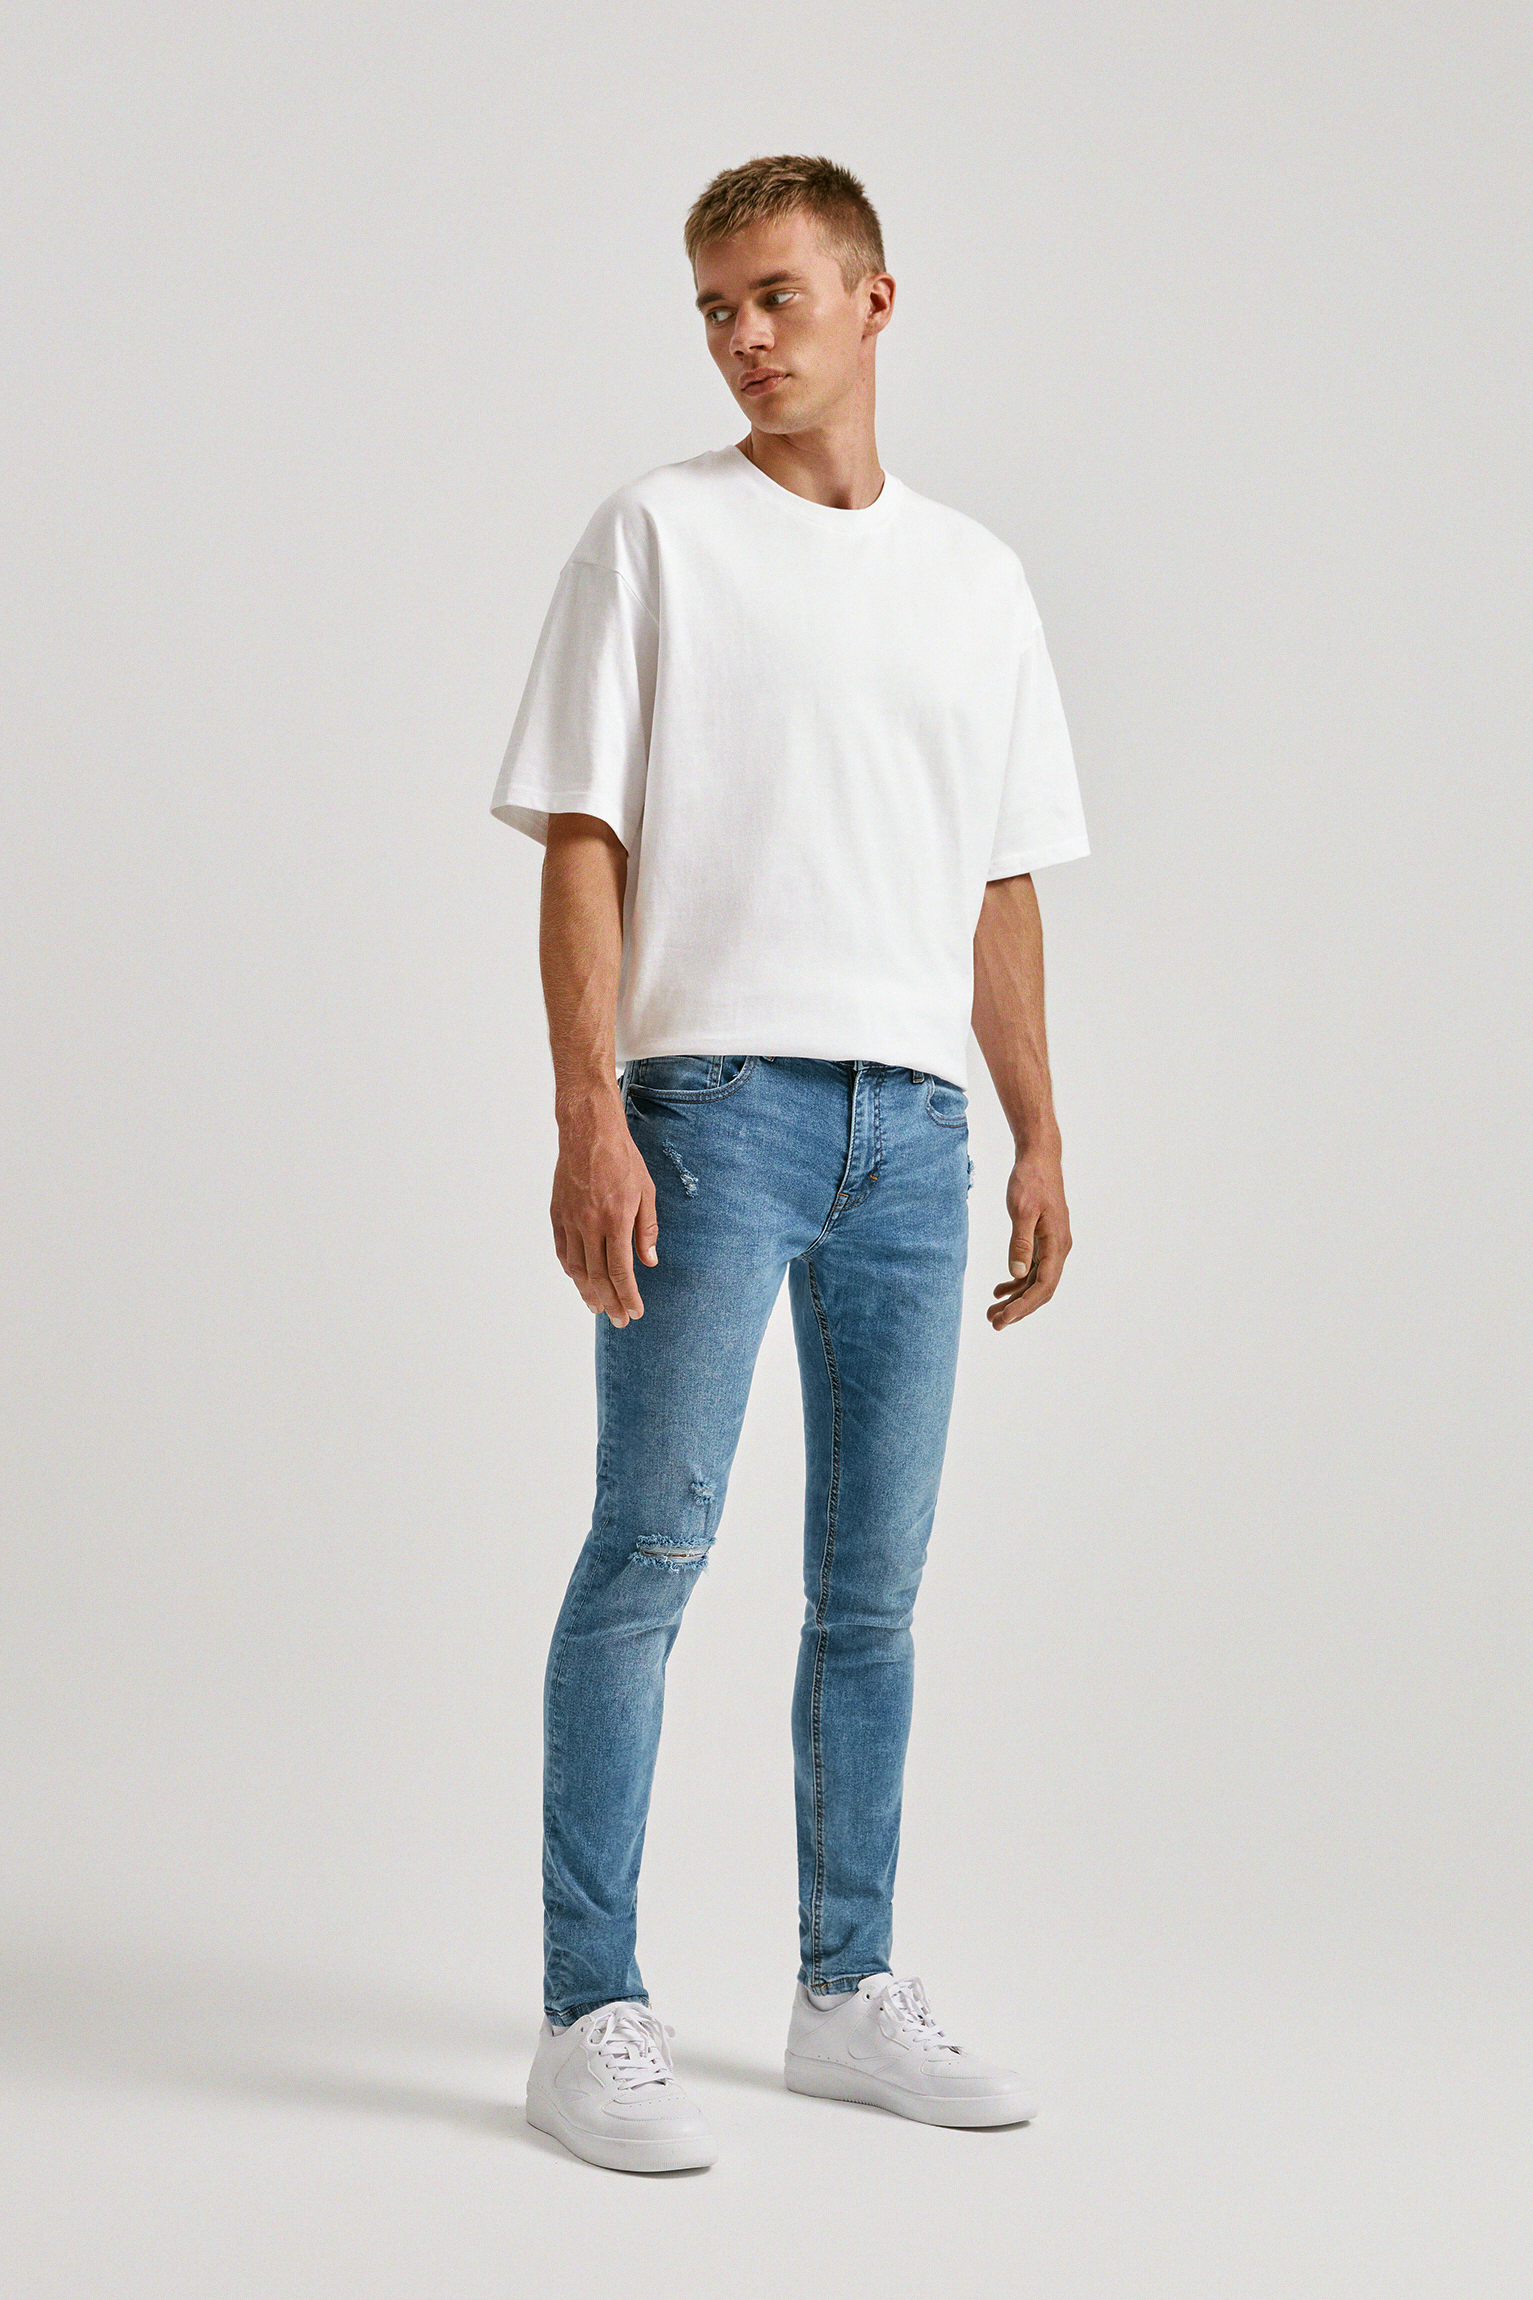 pull and bear super skinny jeans